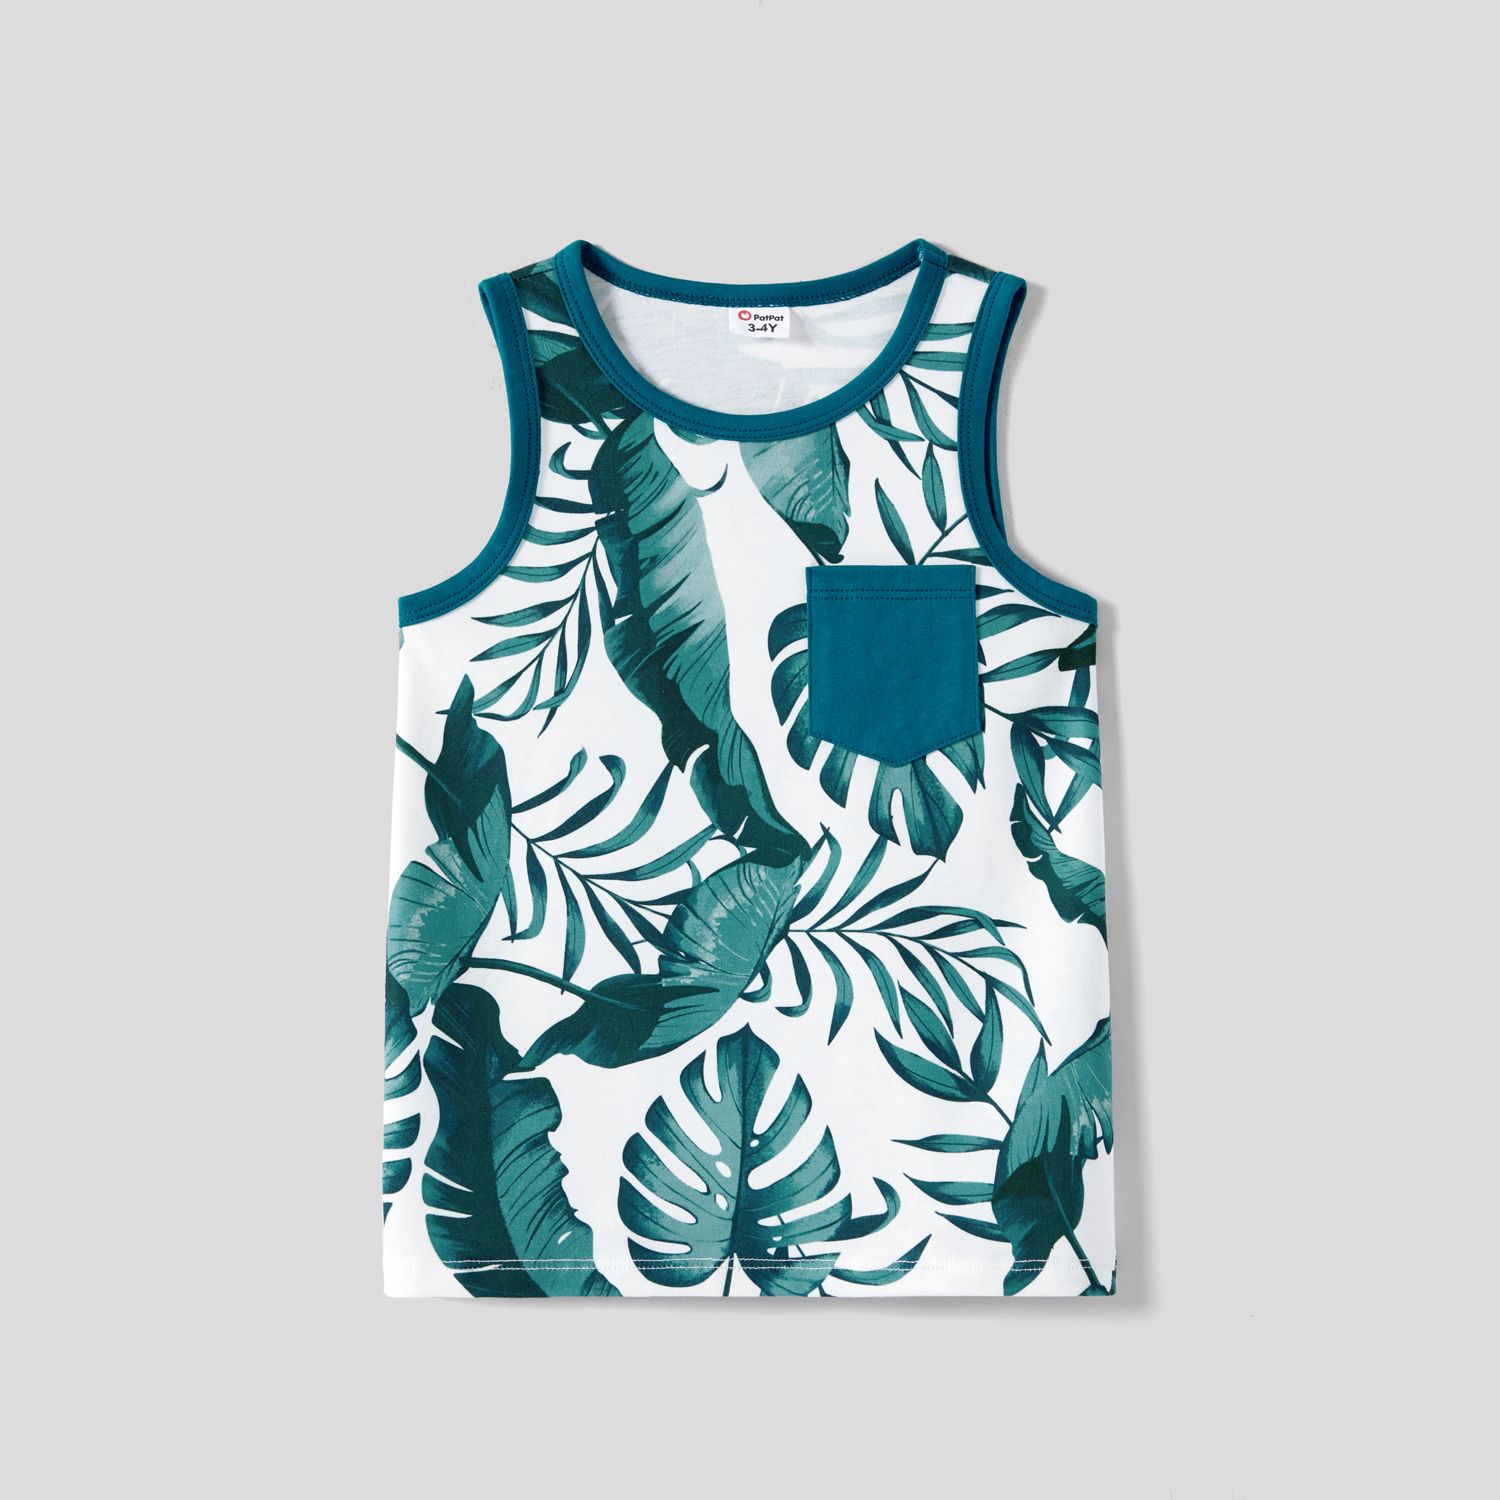 Family Matching Allover Plant Print Short-sleeve Belted Dresses And Patch Pocket Tank Tops Sets